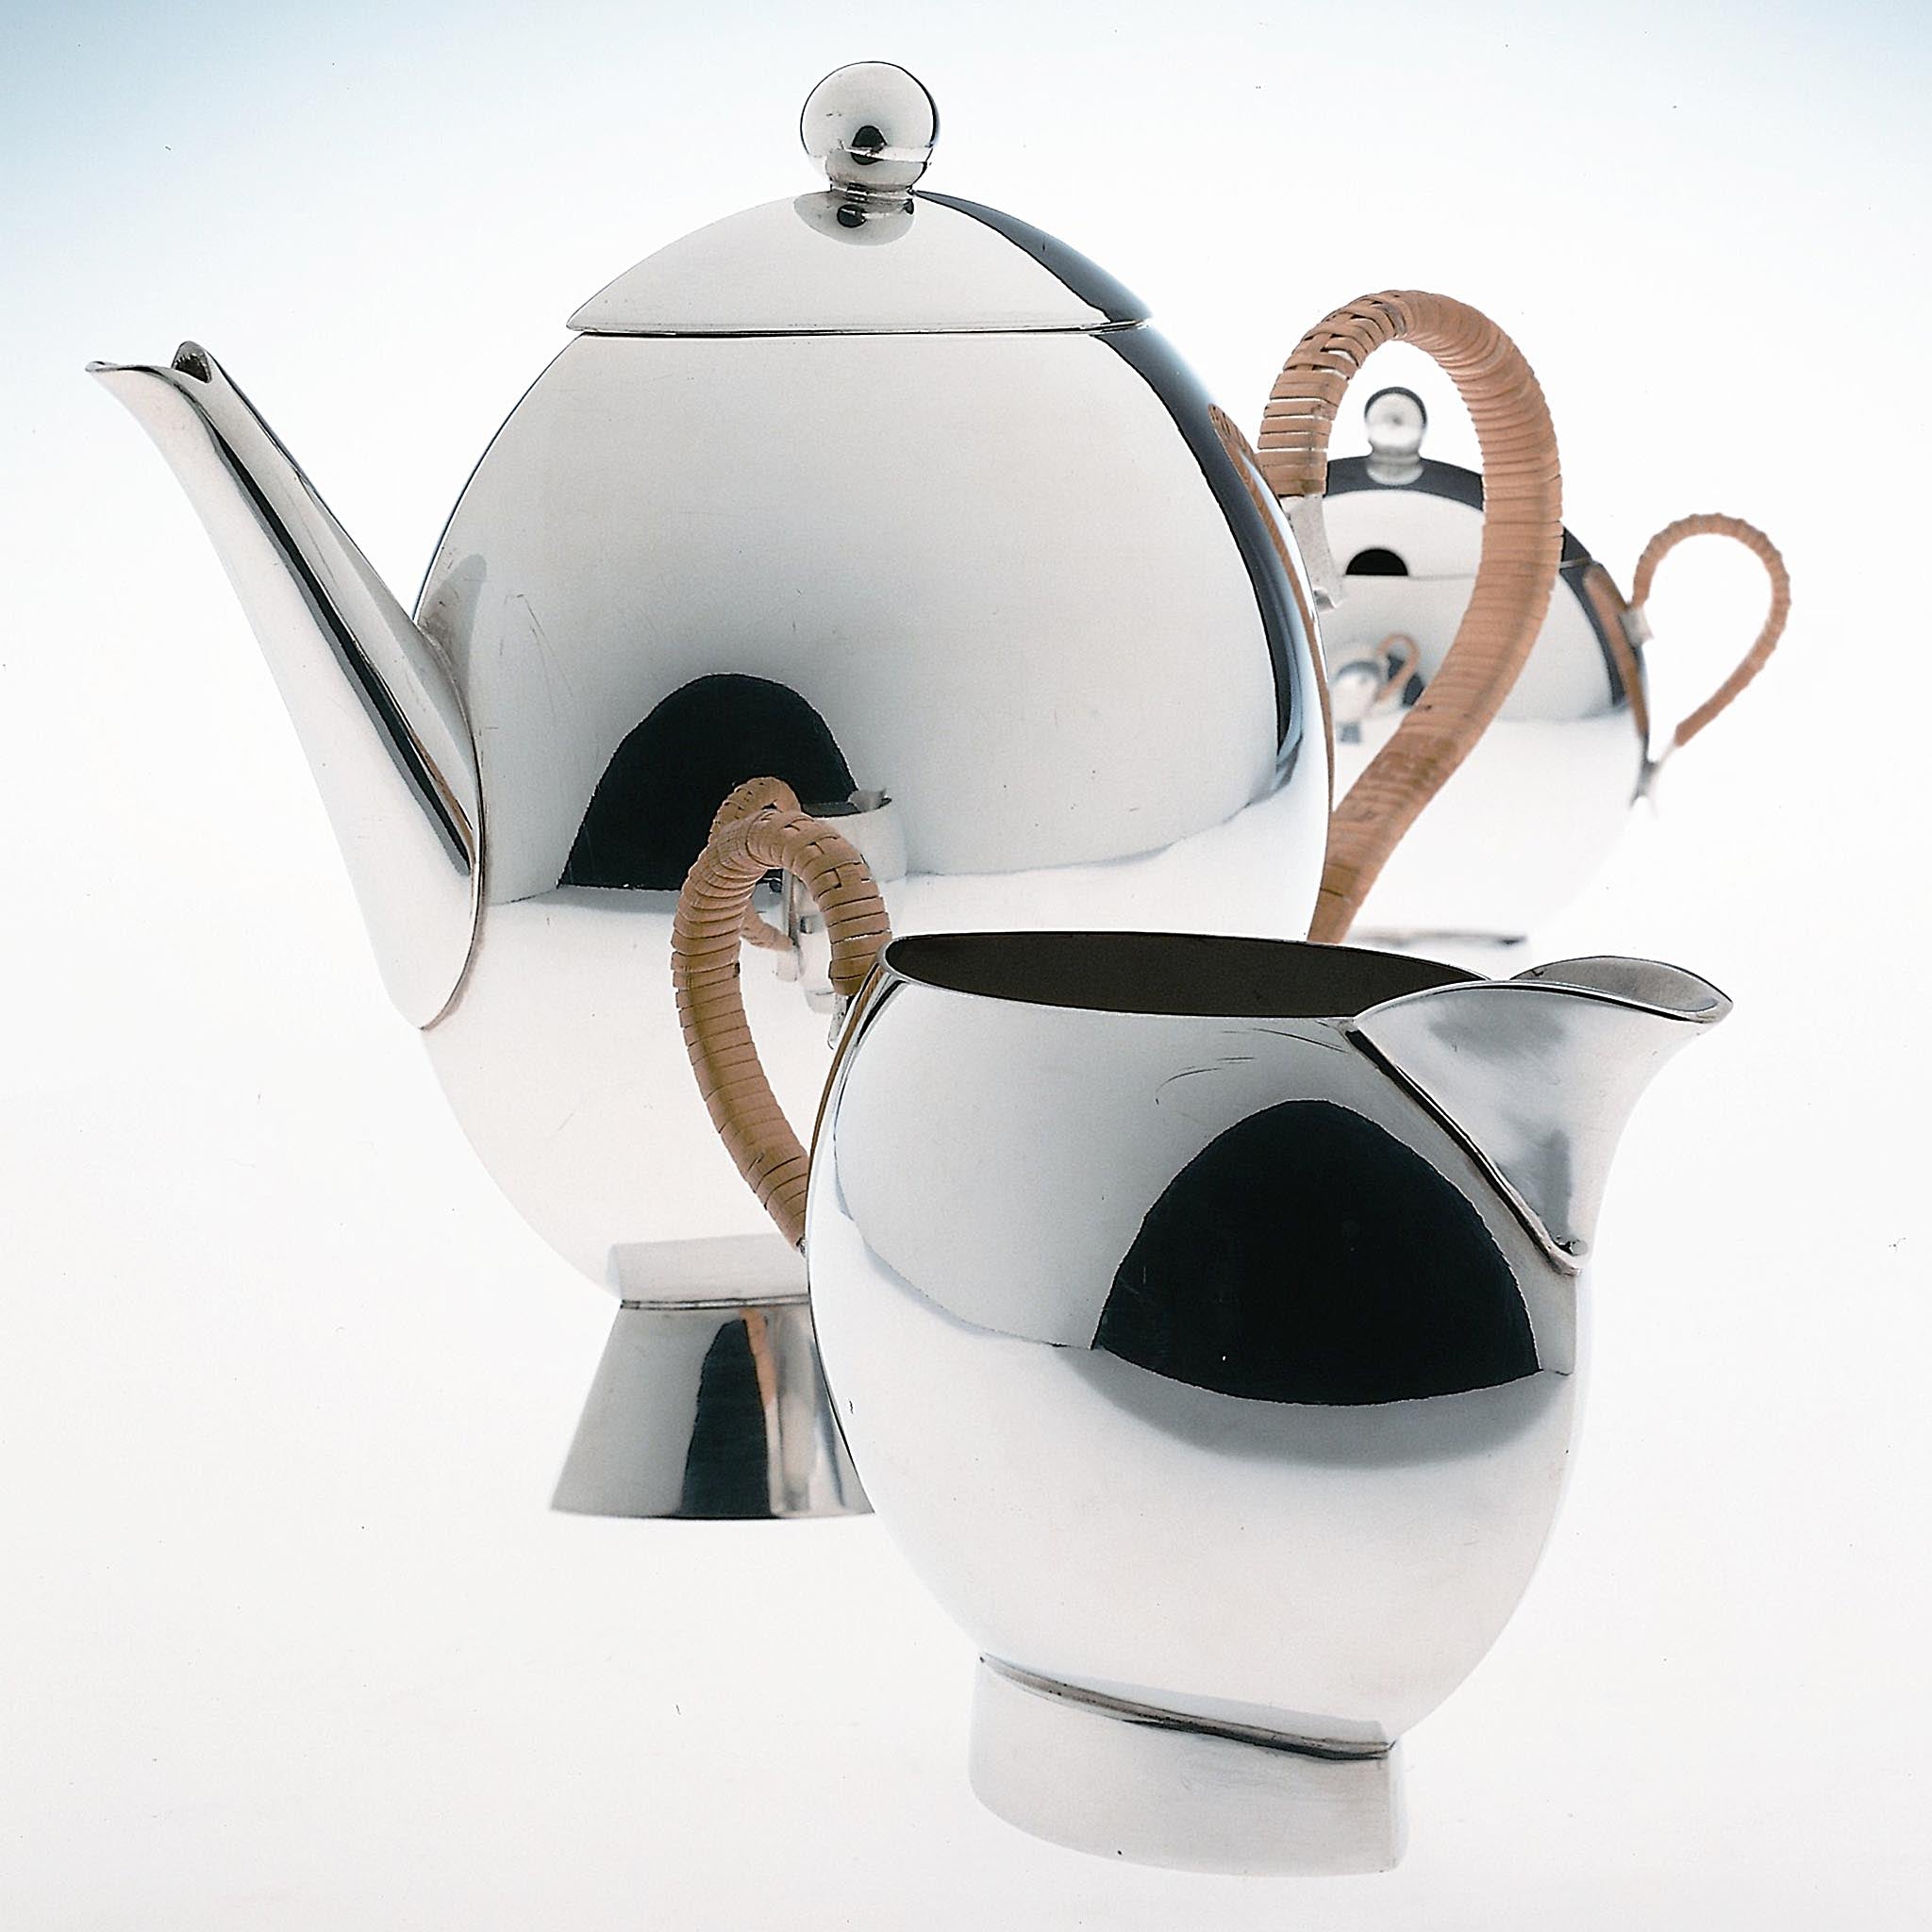 New York Weddings, "The Checklist: Gifts You'll Love - Nick Munro's Sunfish tea serving set," Summer 2011, page 44.  